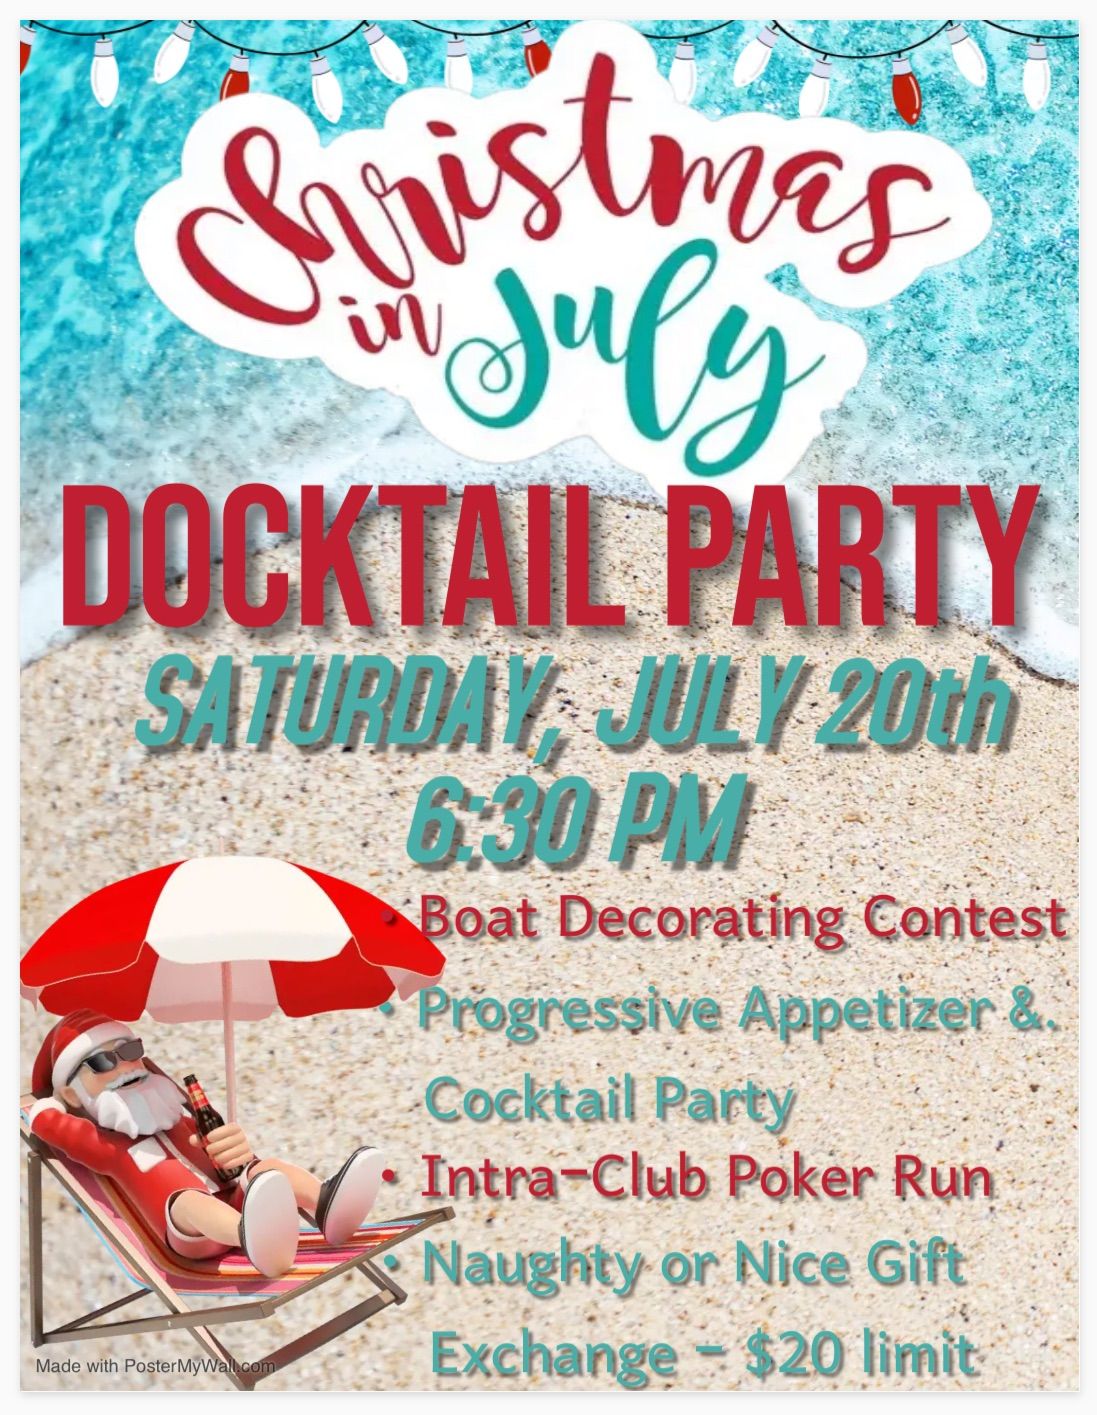 Christmas in July Docktail Party - Members Only